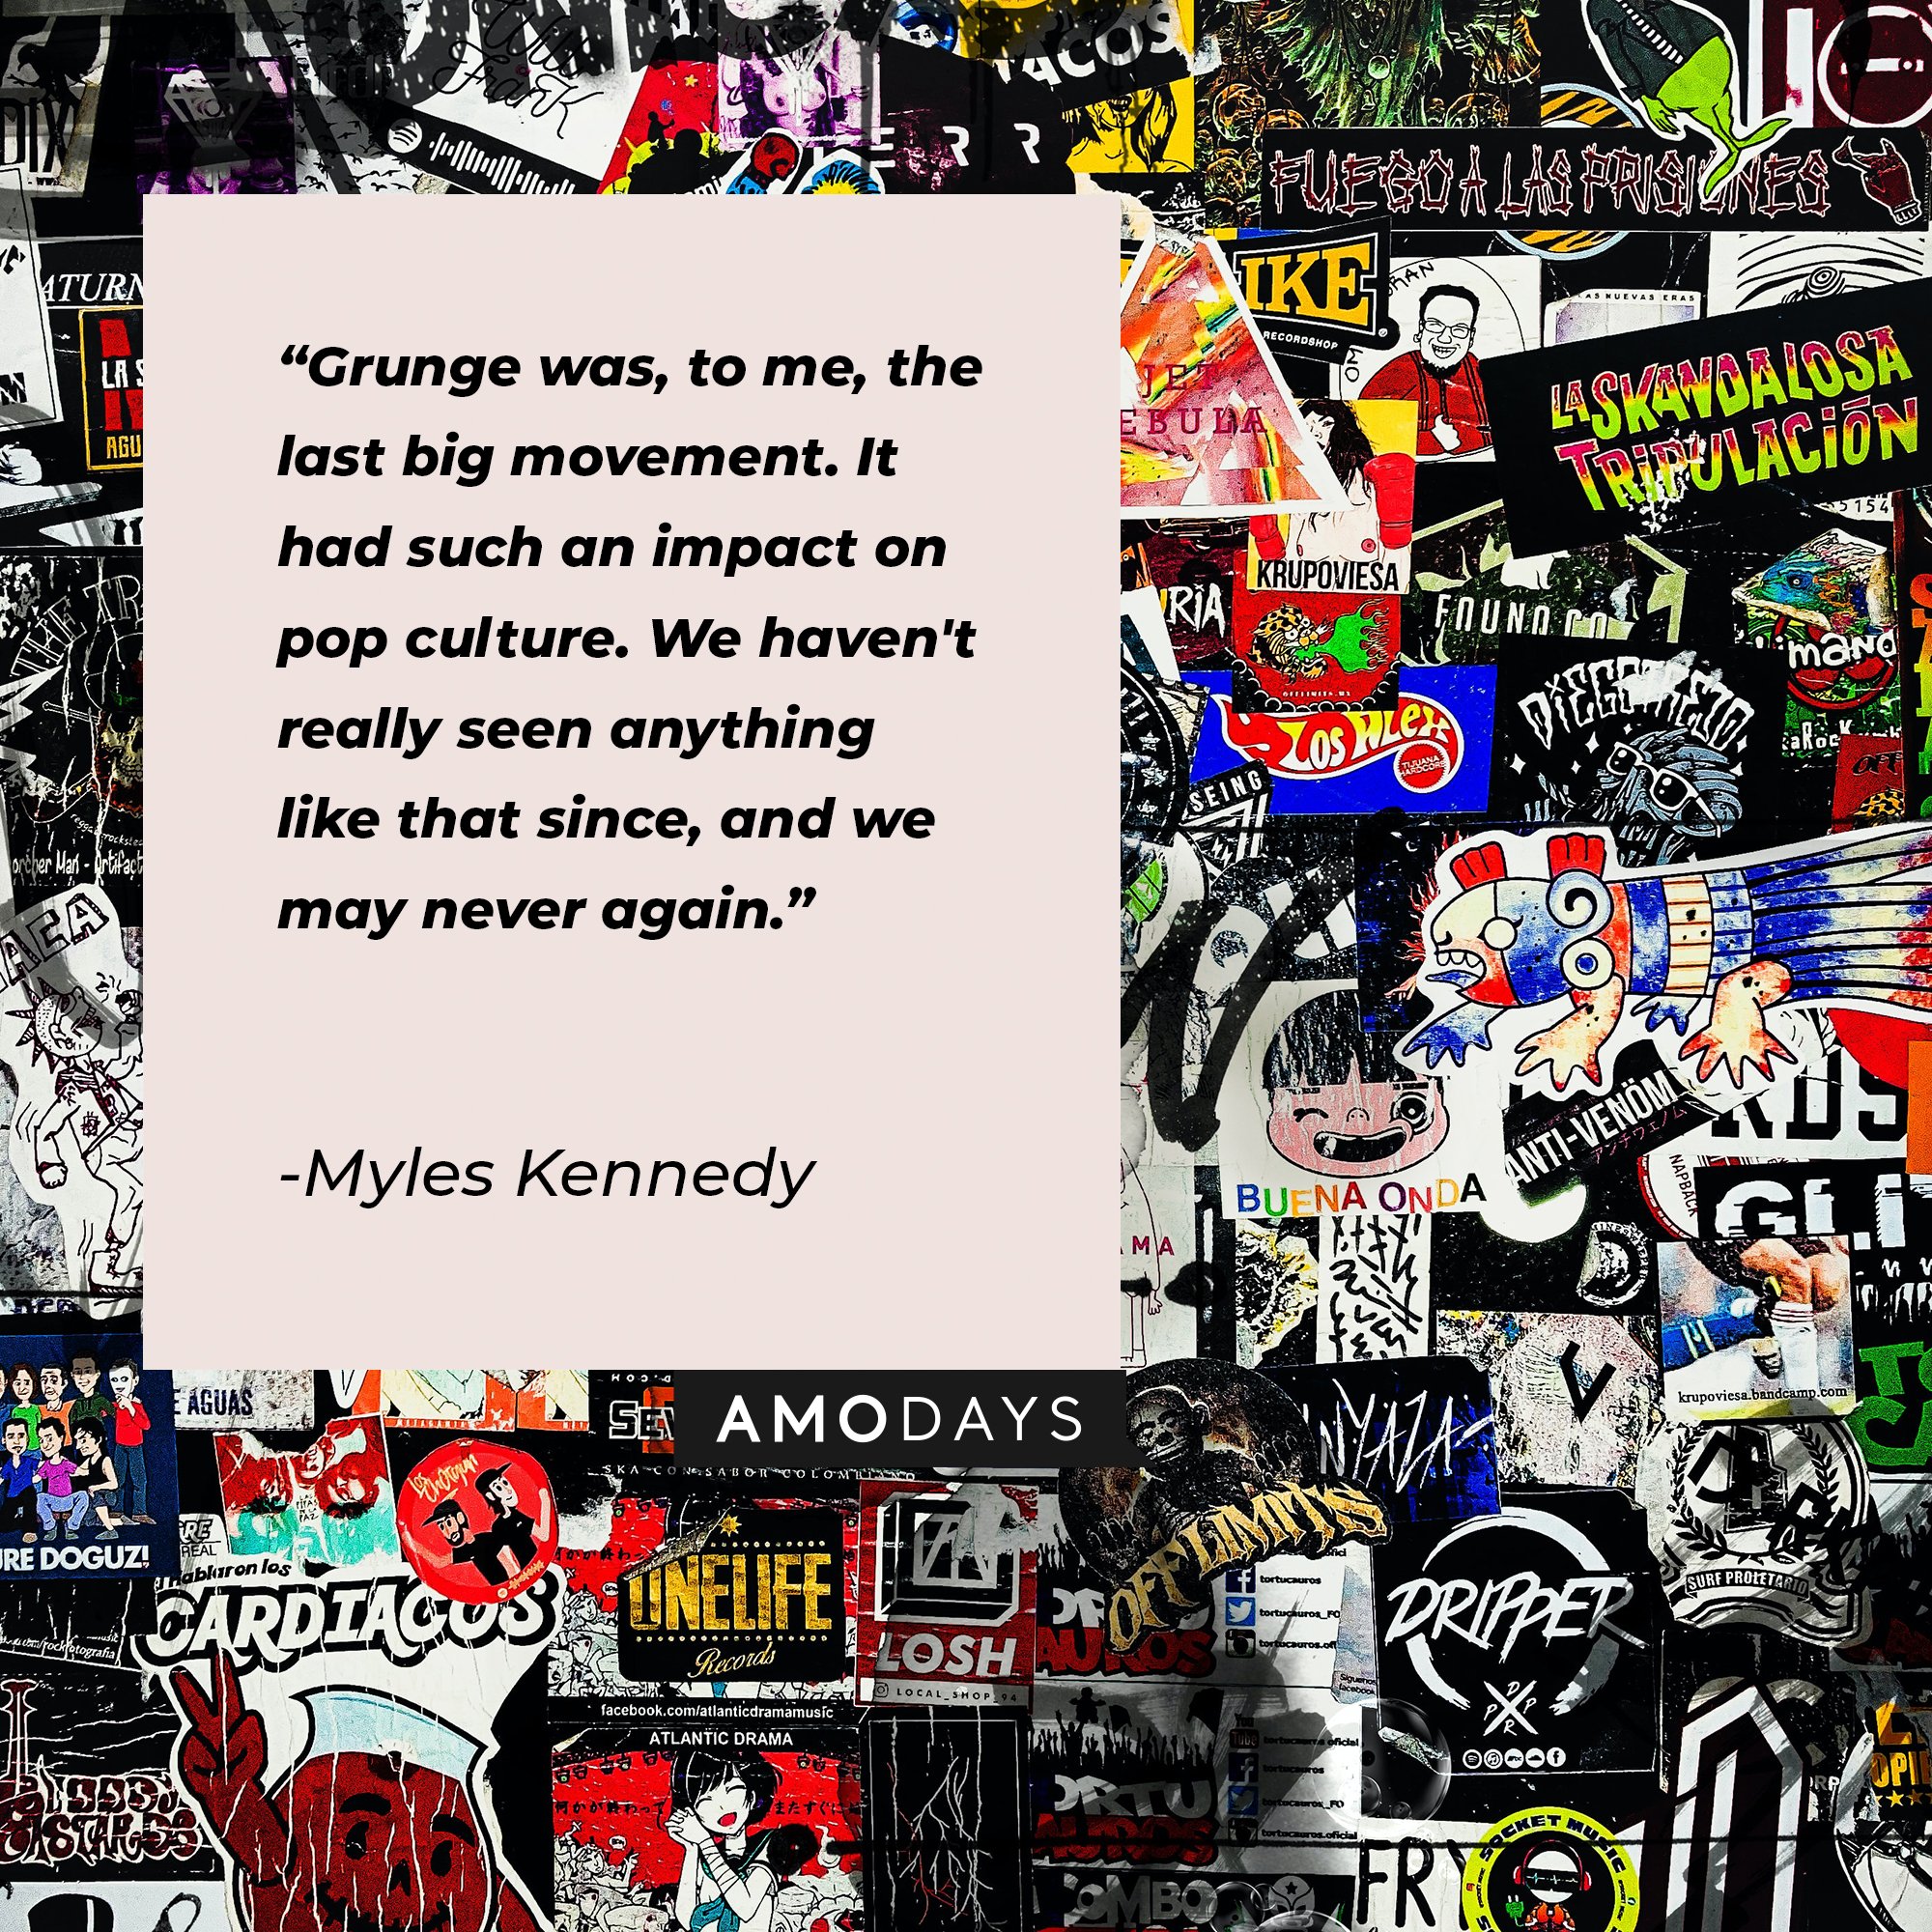 Myles Kennedy’s quote: "Grunge was, to me, the last big movement. It had such an impact on pop culture. We haven't really seen anything like that since, and we may never again." | Image: AmoDays